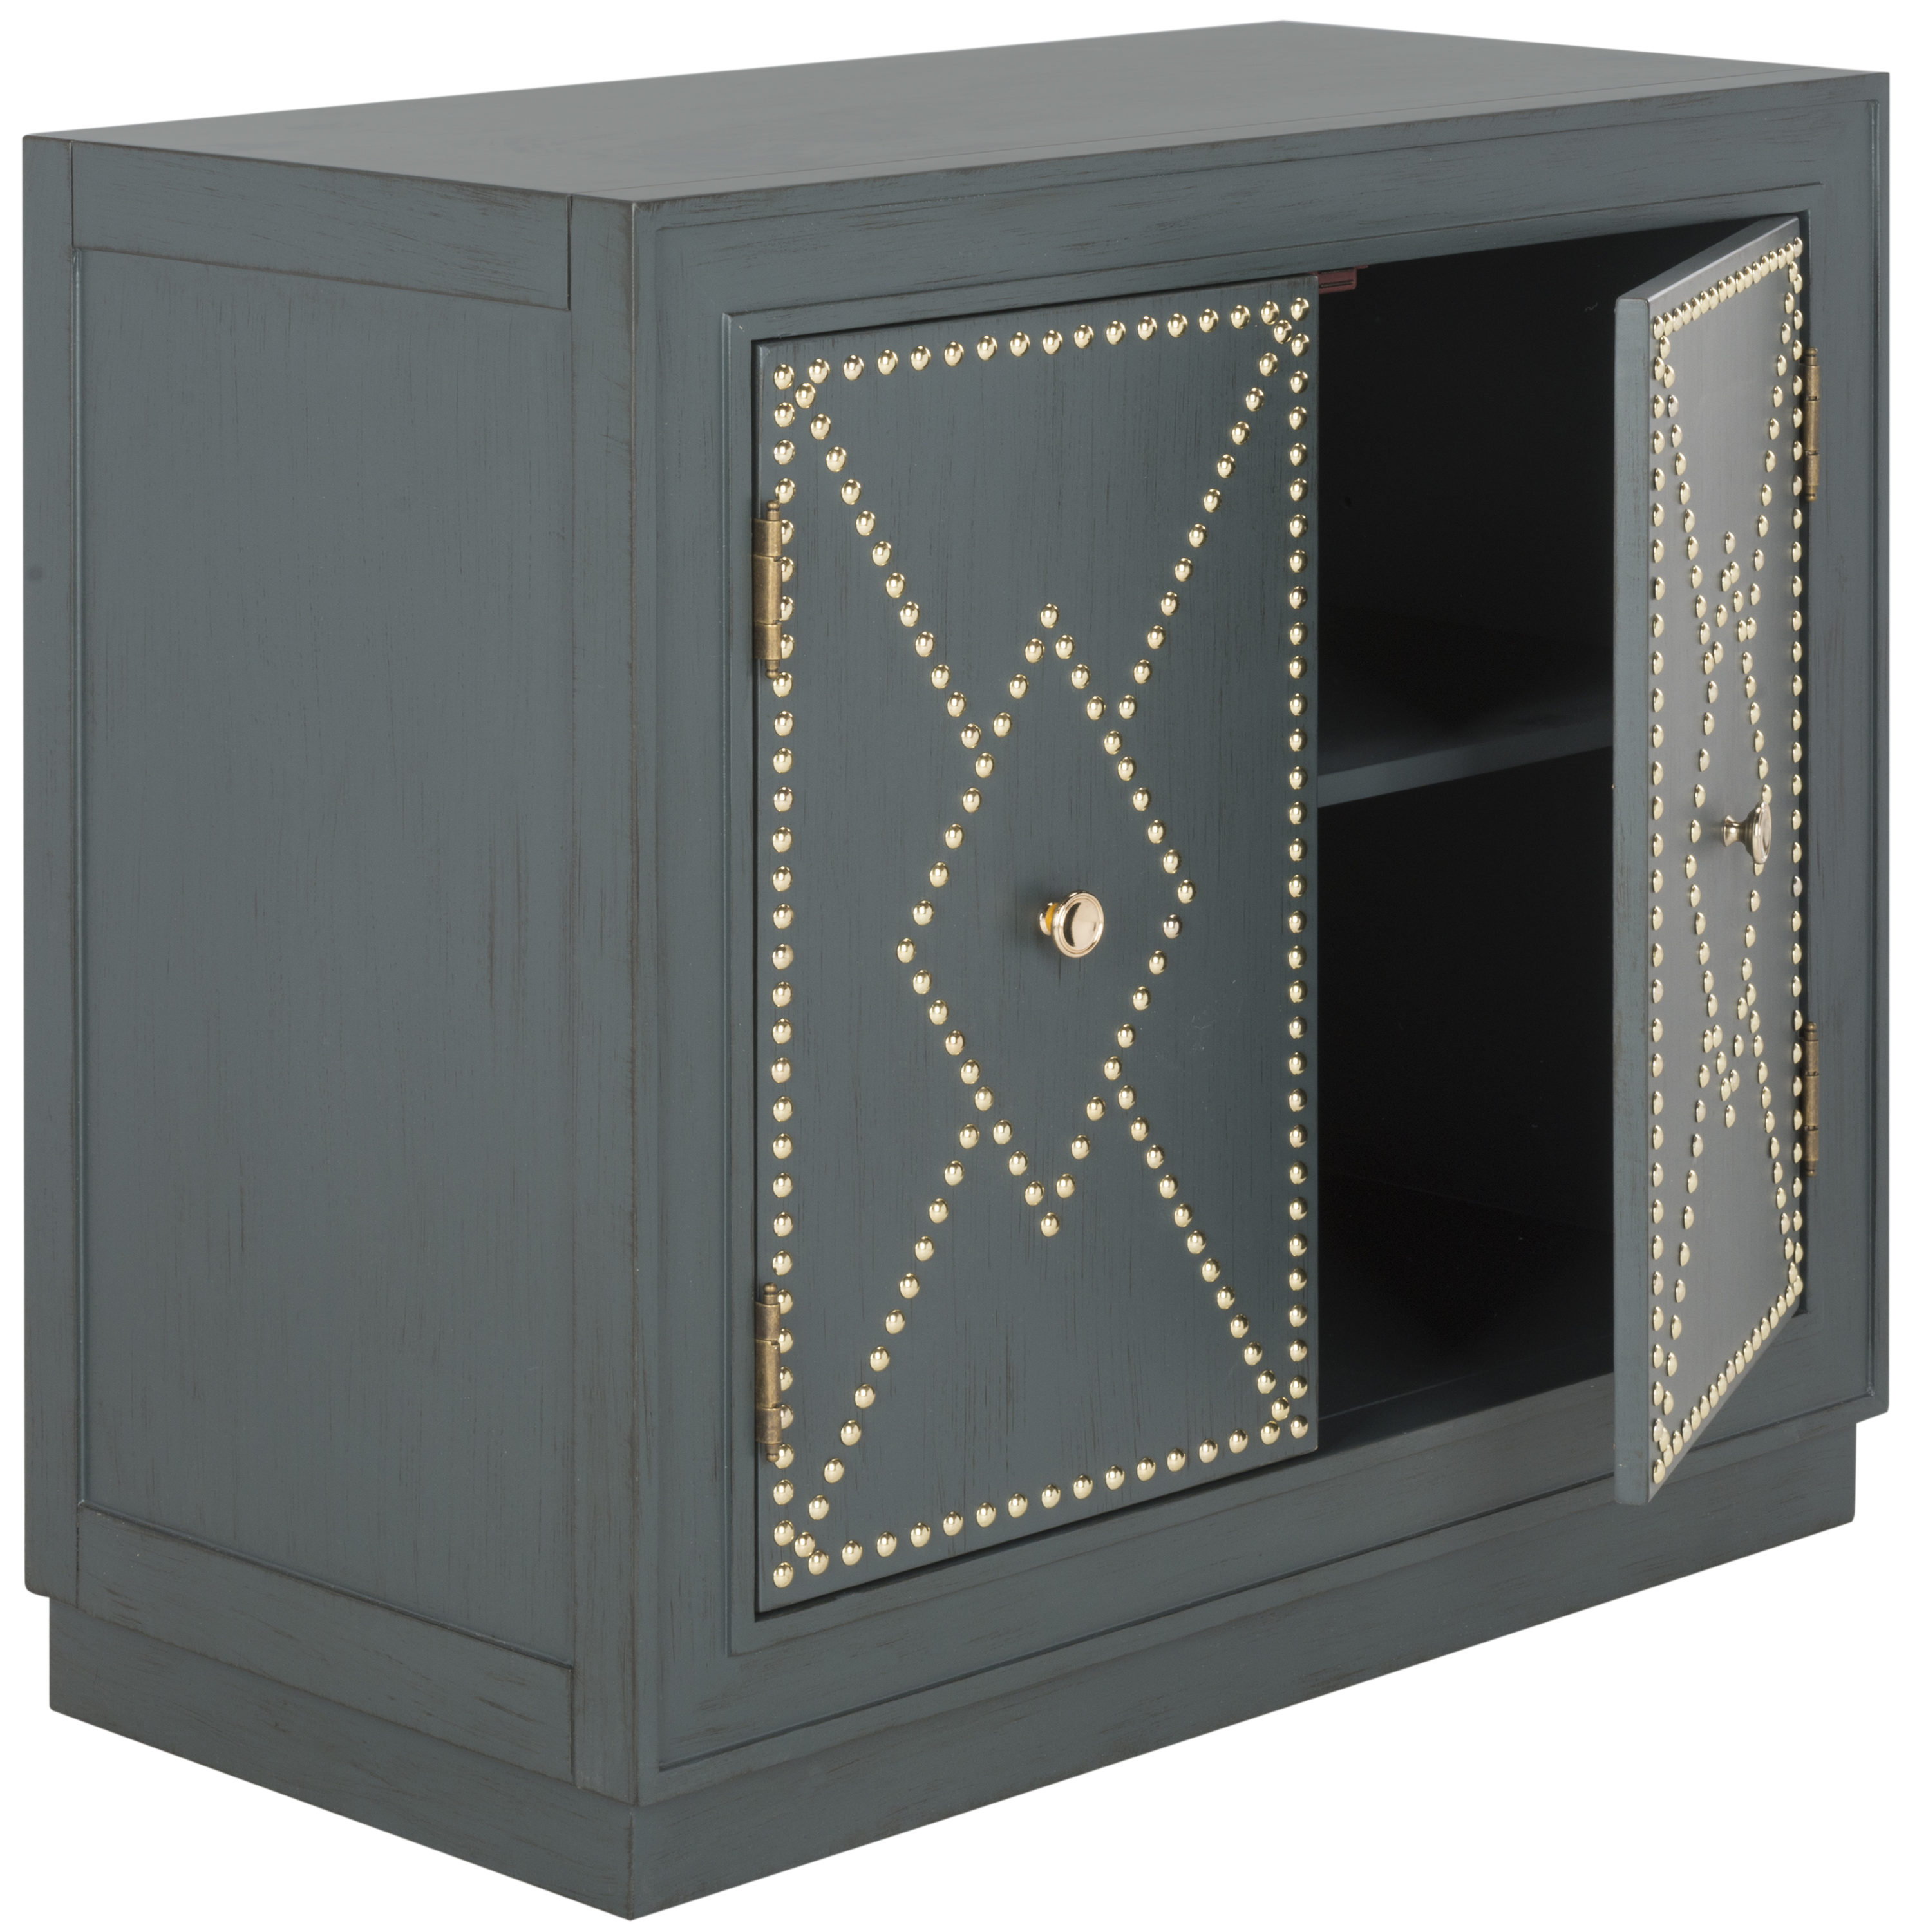 Safavieh Erin Steel Teal/Gold/Mirror Acacia Chest at Lowes.com